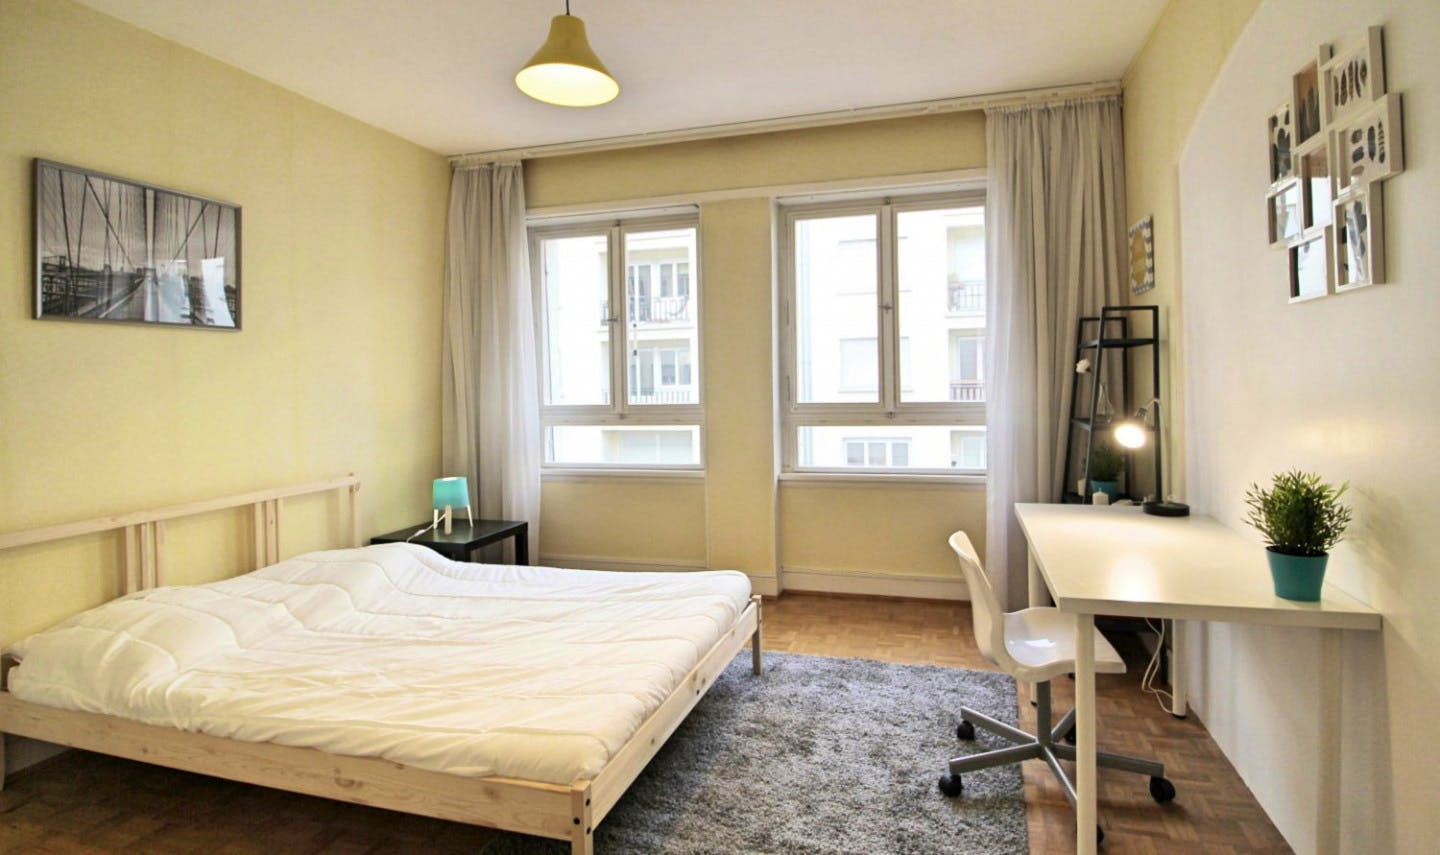 Superb apartment located in the center of Strasbourg